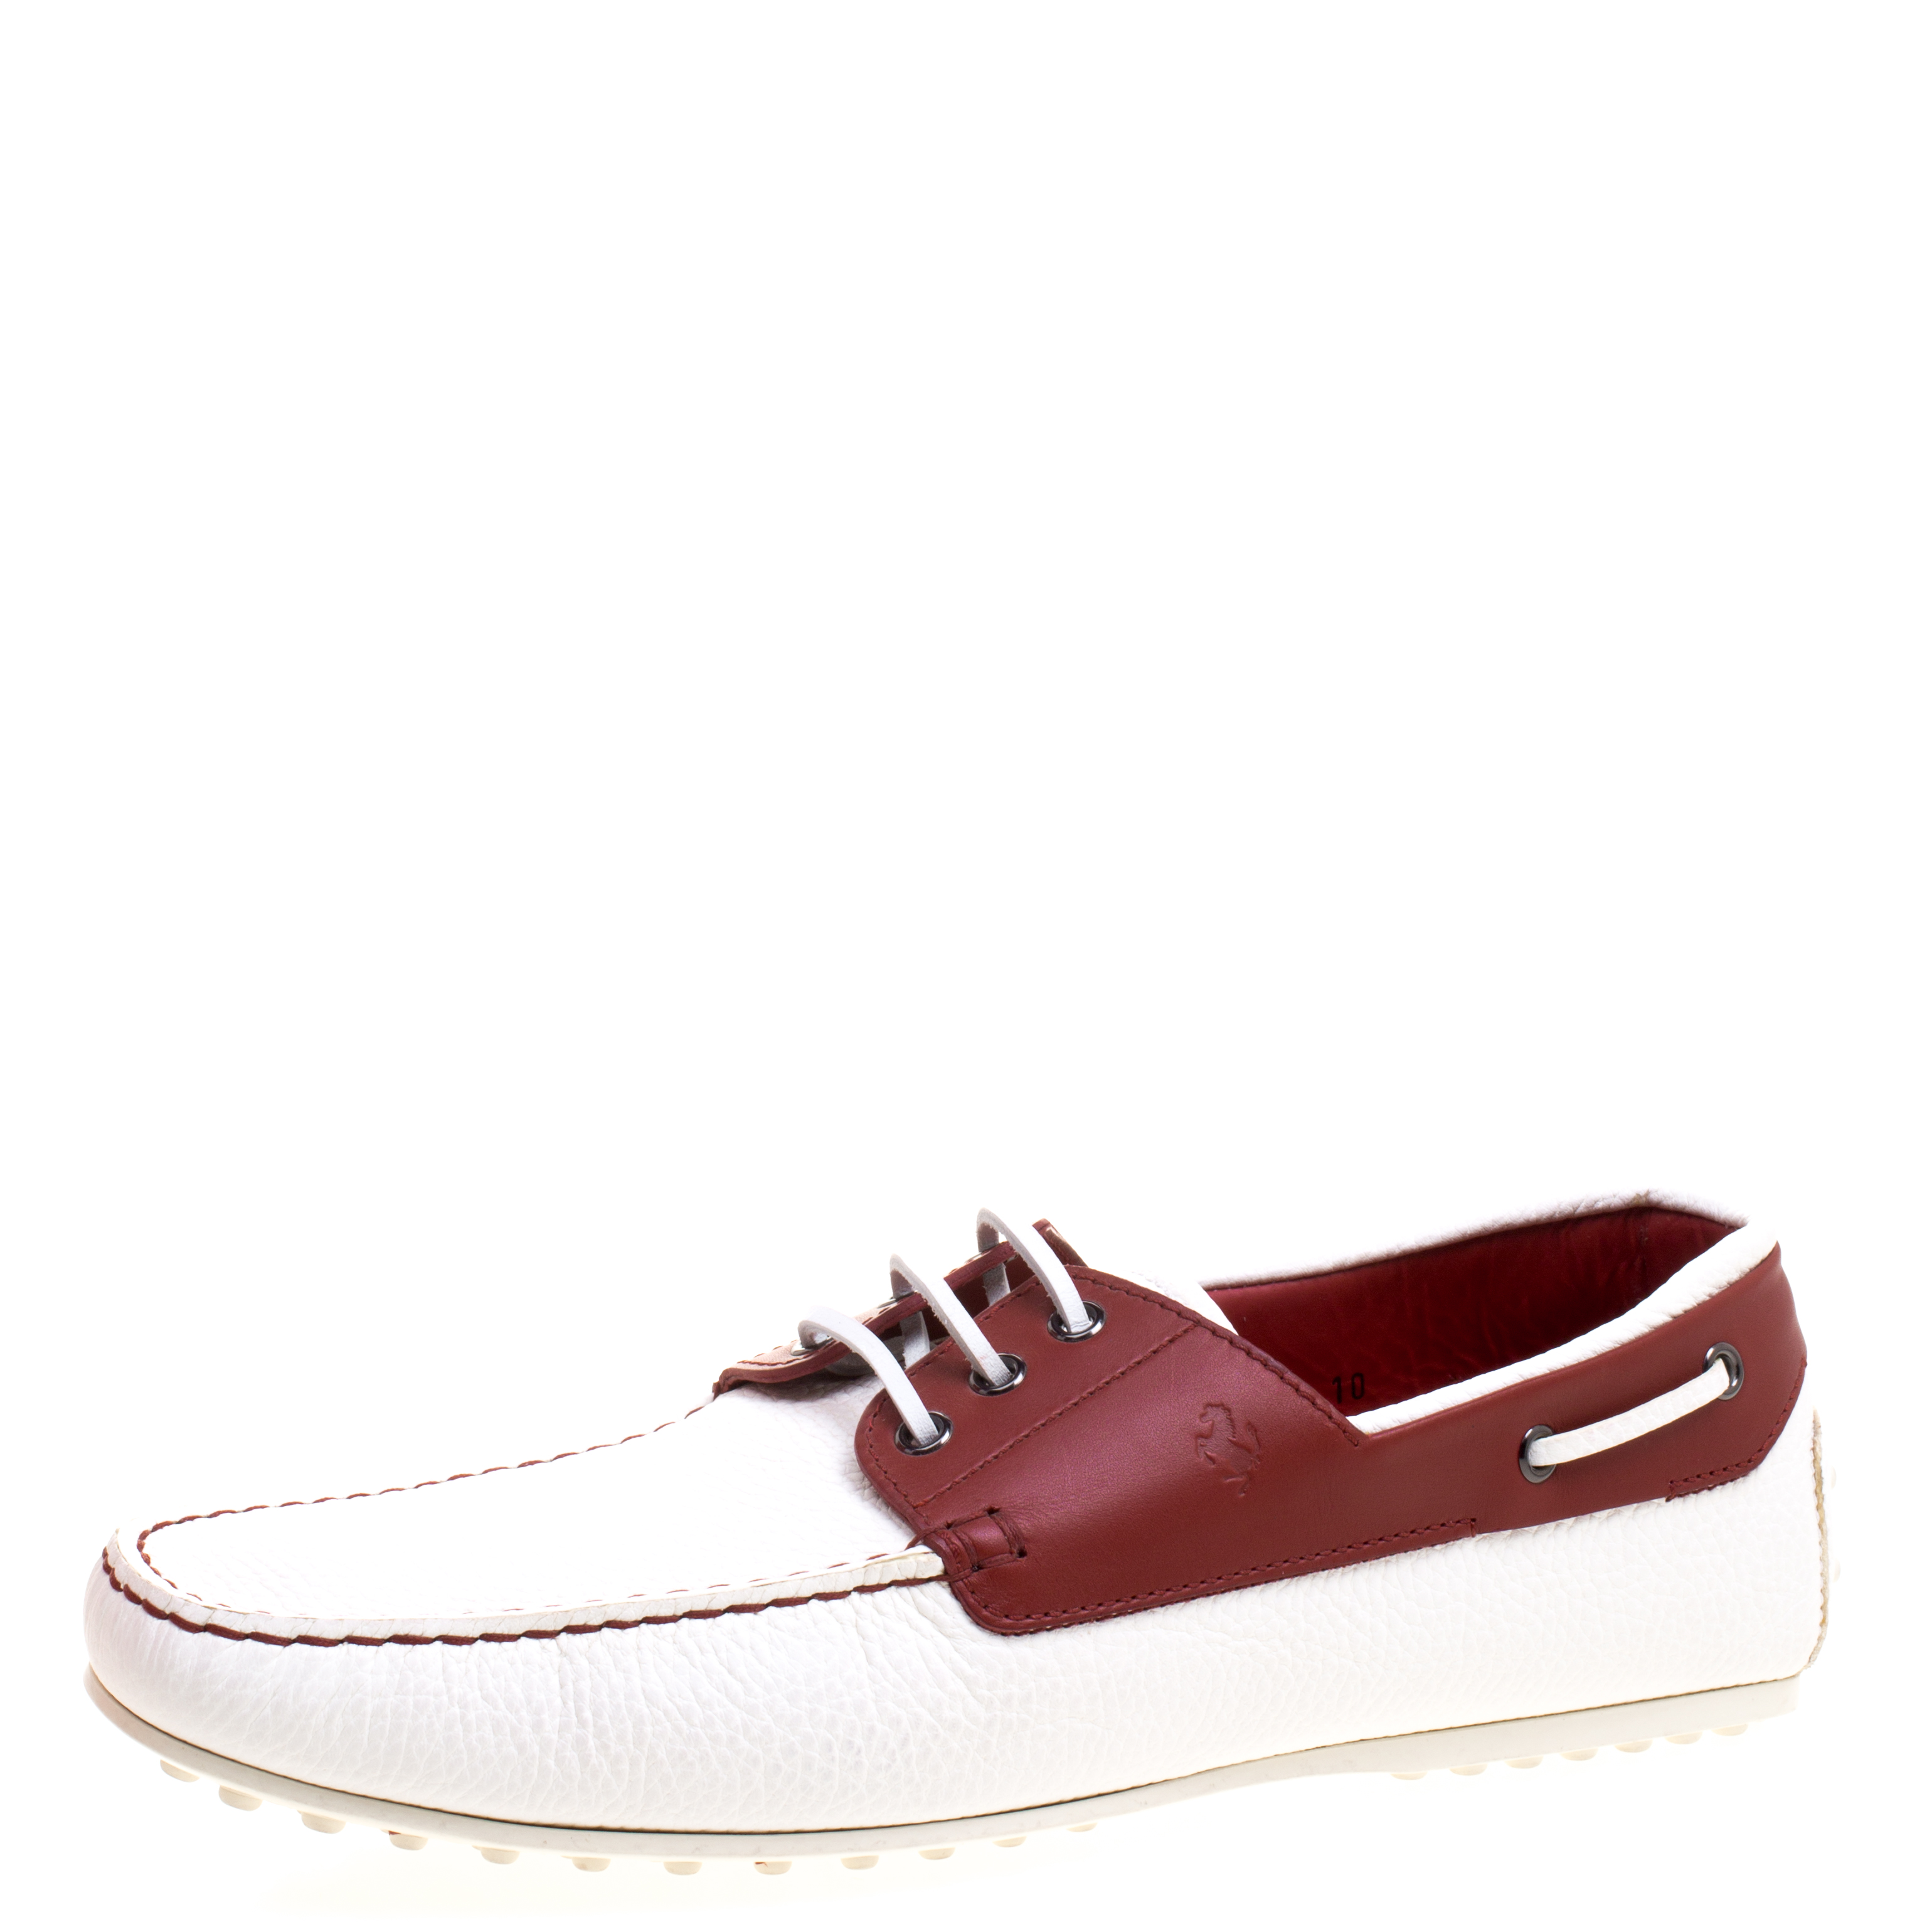 luxury boat shoes